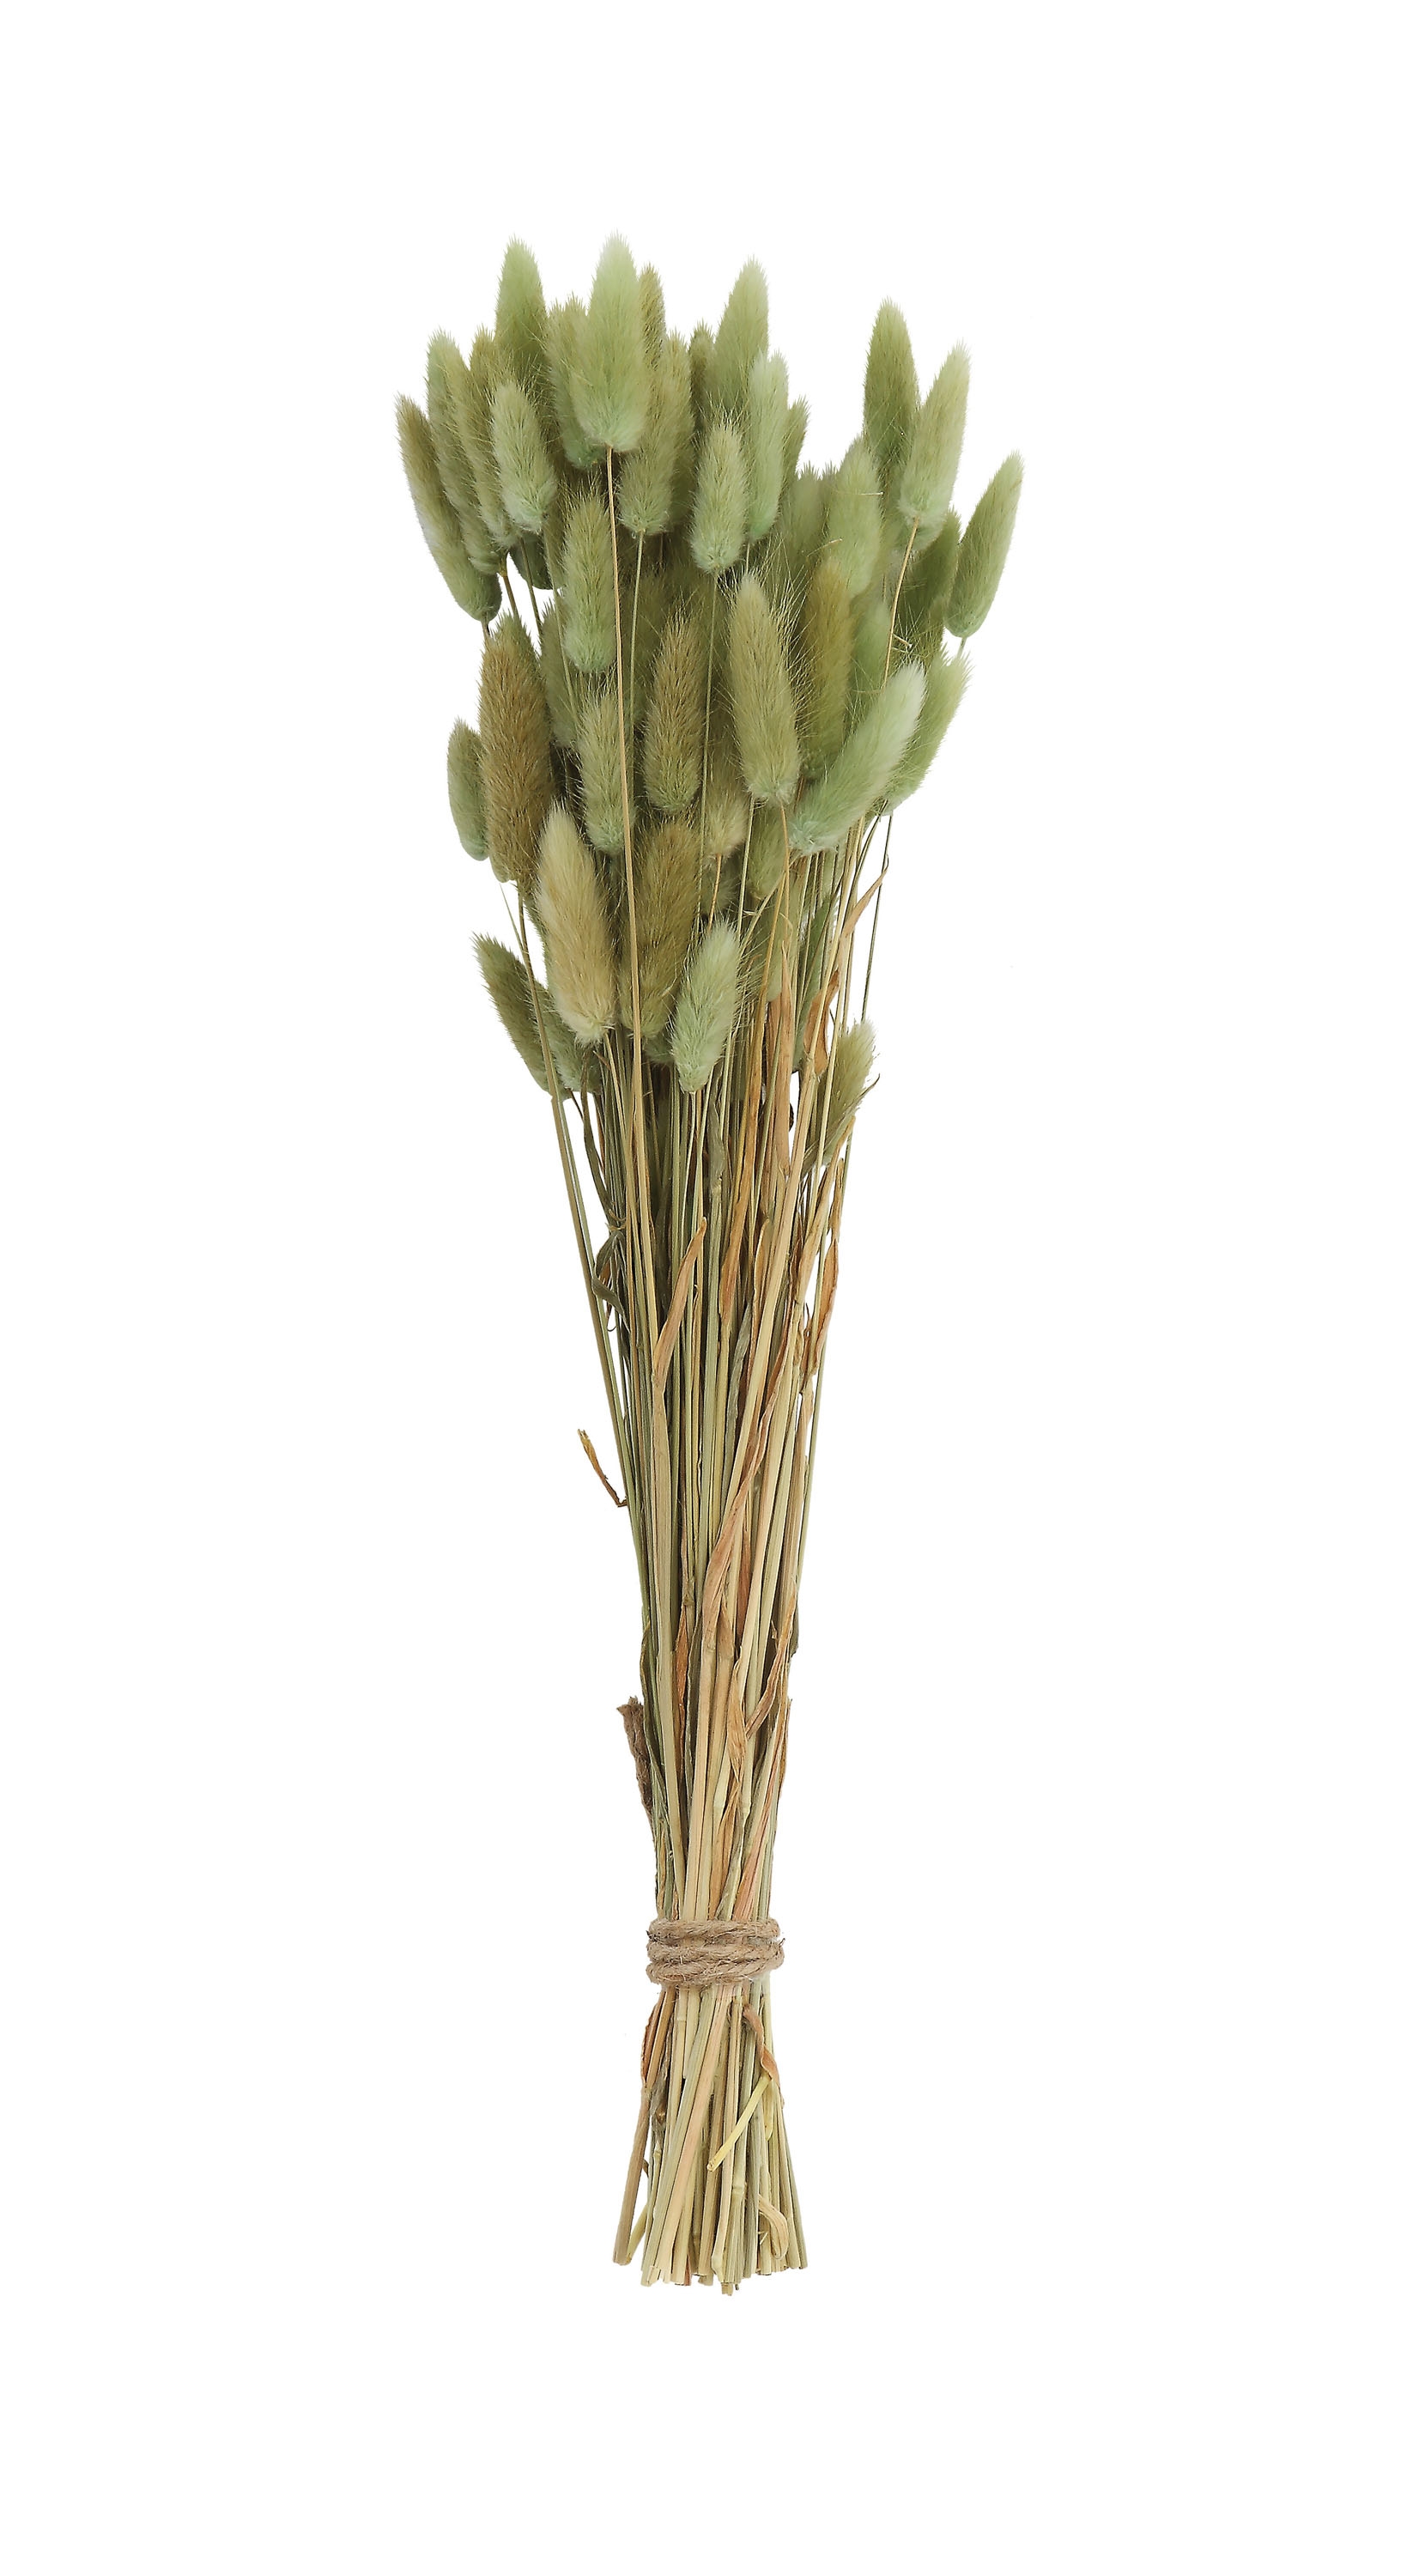 15" Dried Natural Bunny Tail Grass Bunch - Image 0